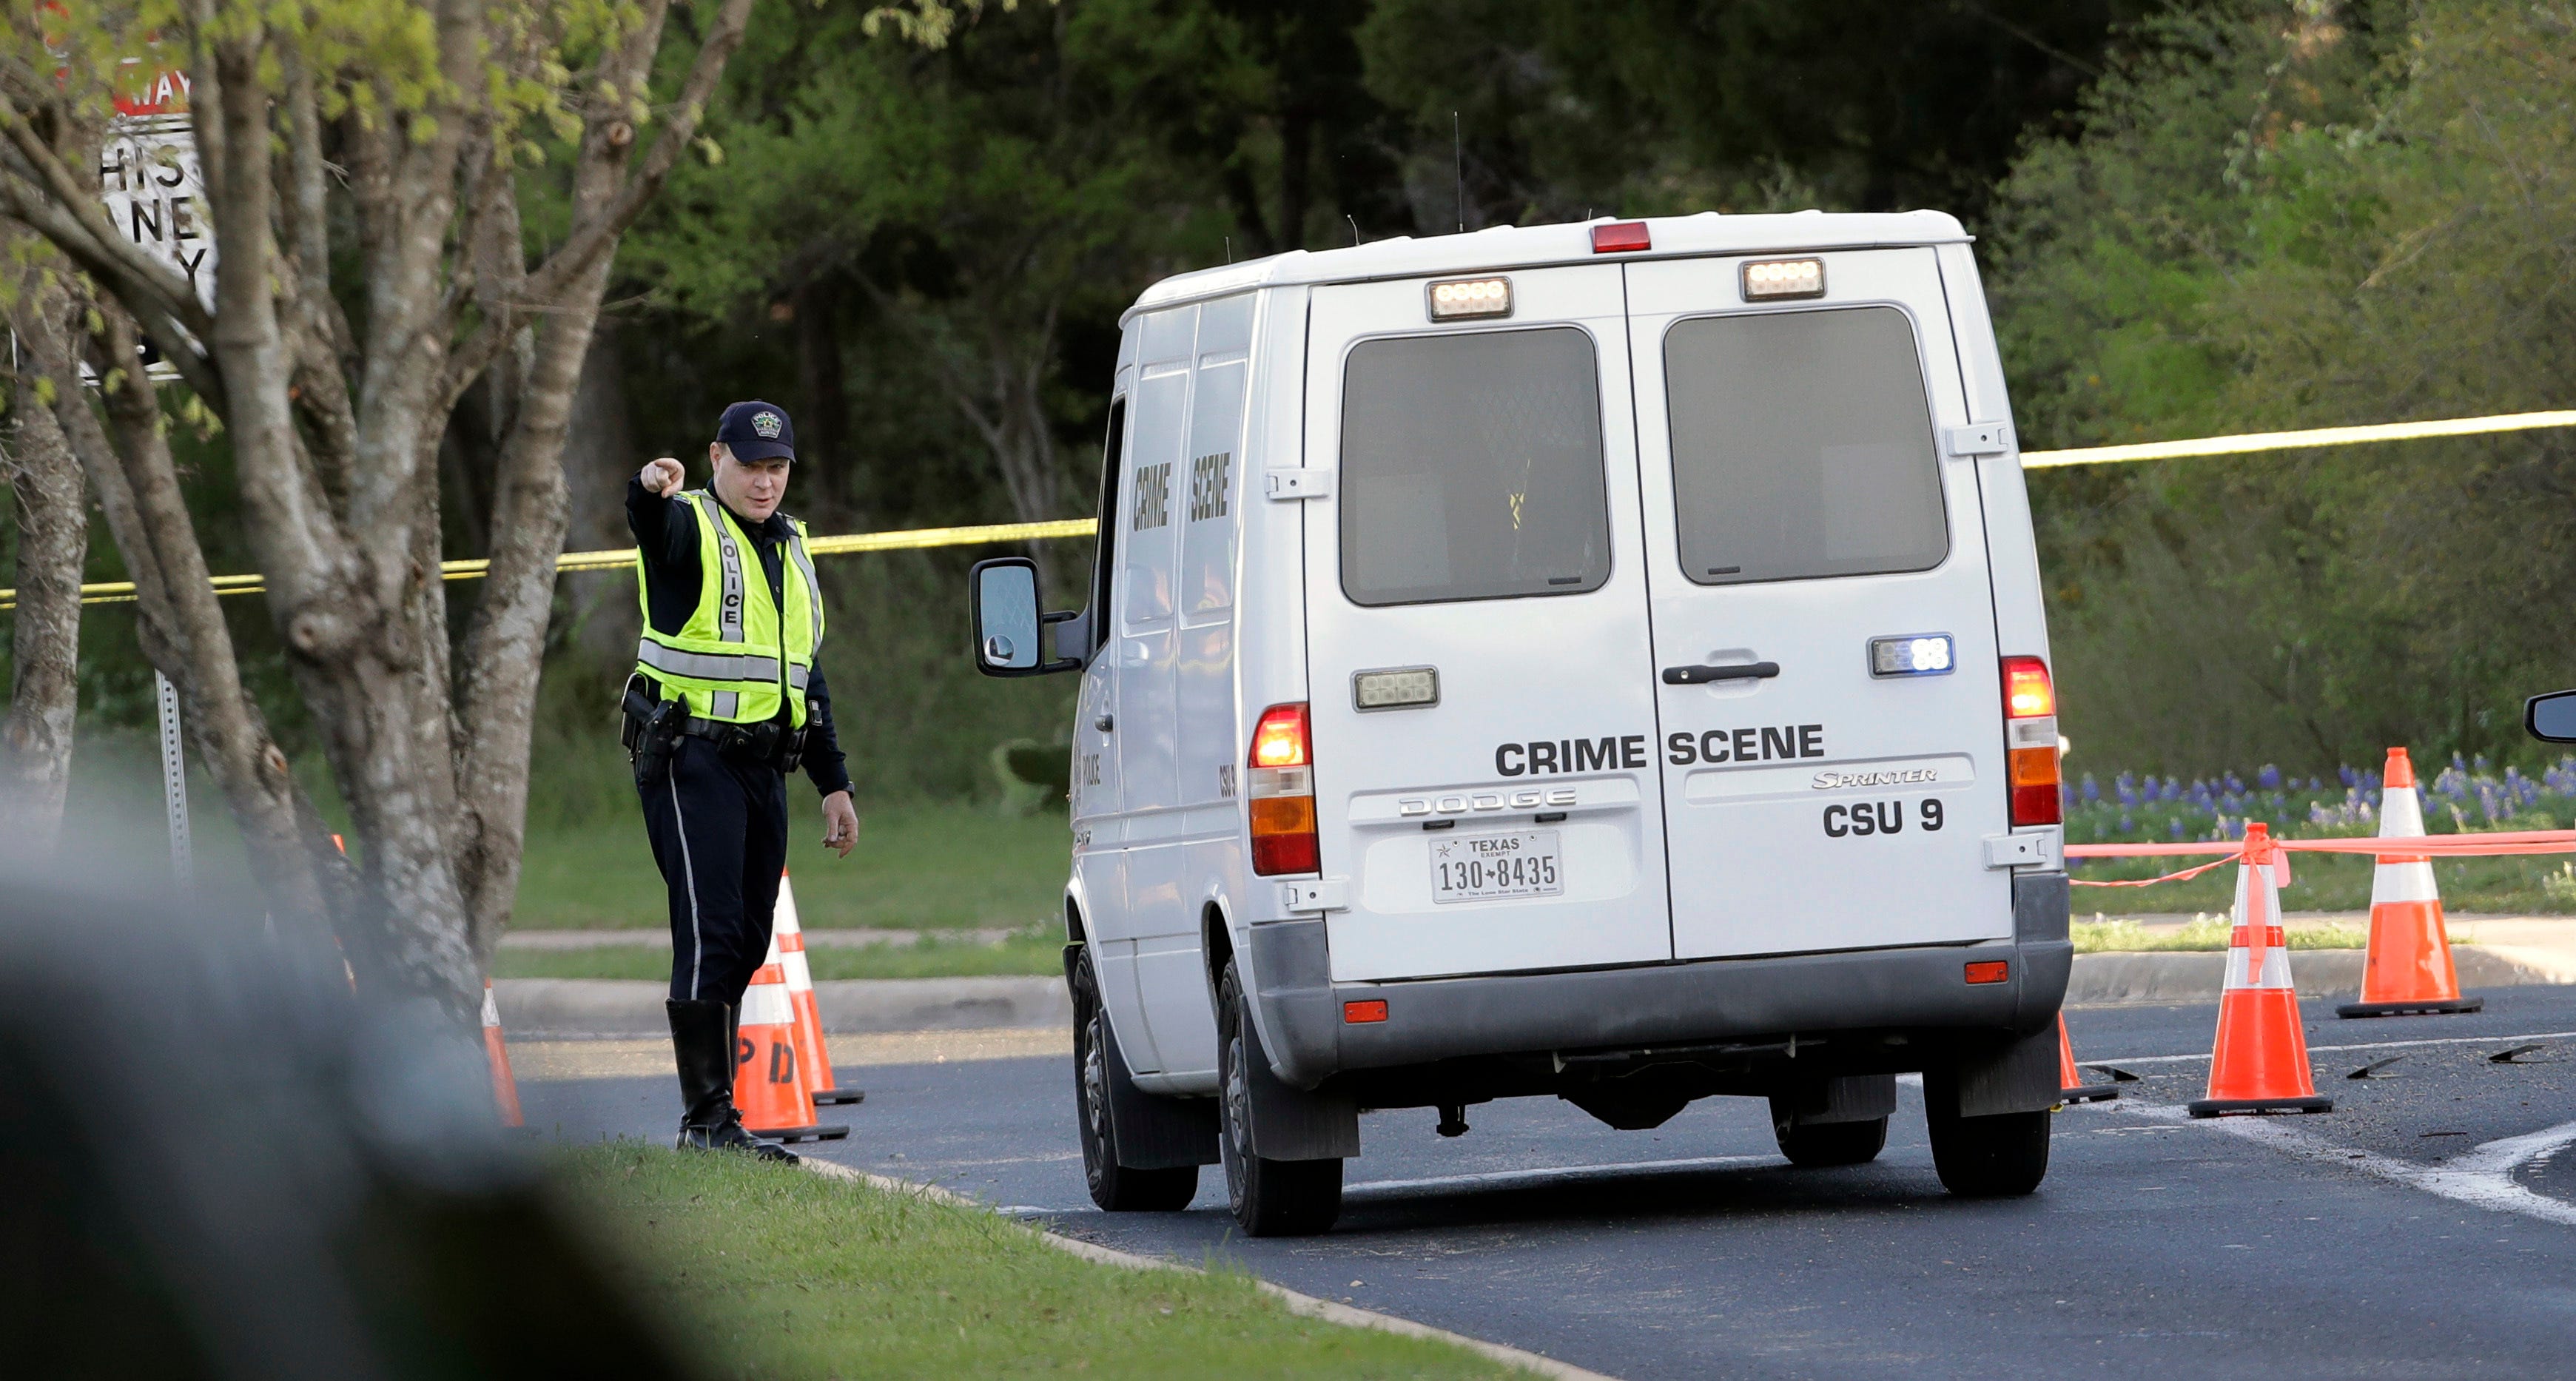 A police crime scene van arrives near the site of Sunday's deadly explosion, March 19, 2018, in Austin, Texas. Police warned nearby residents to remain indoors overnight as investigators looked for possible links to other package bombings elsewhere i